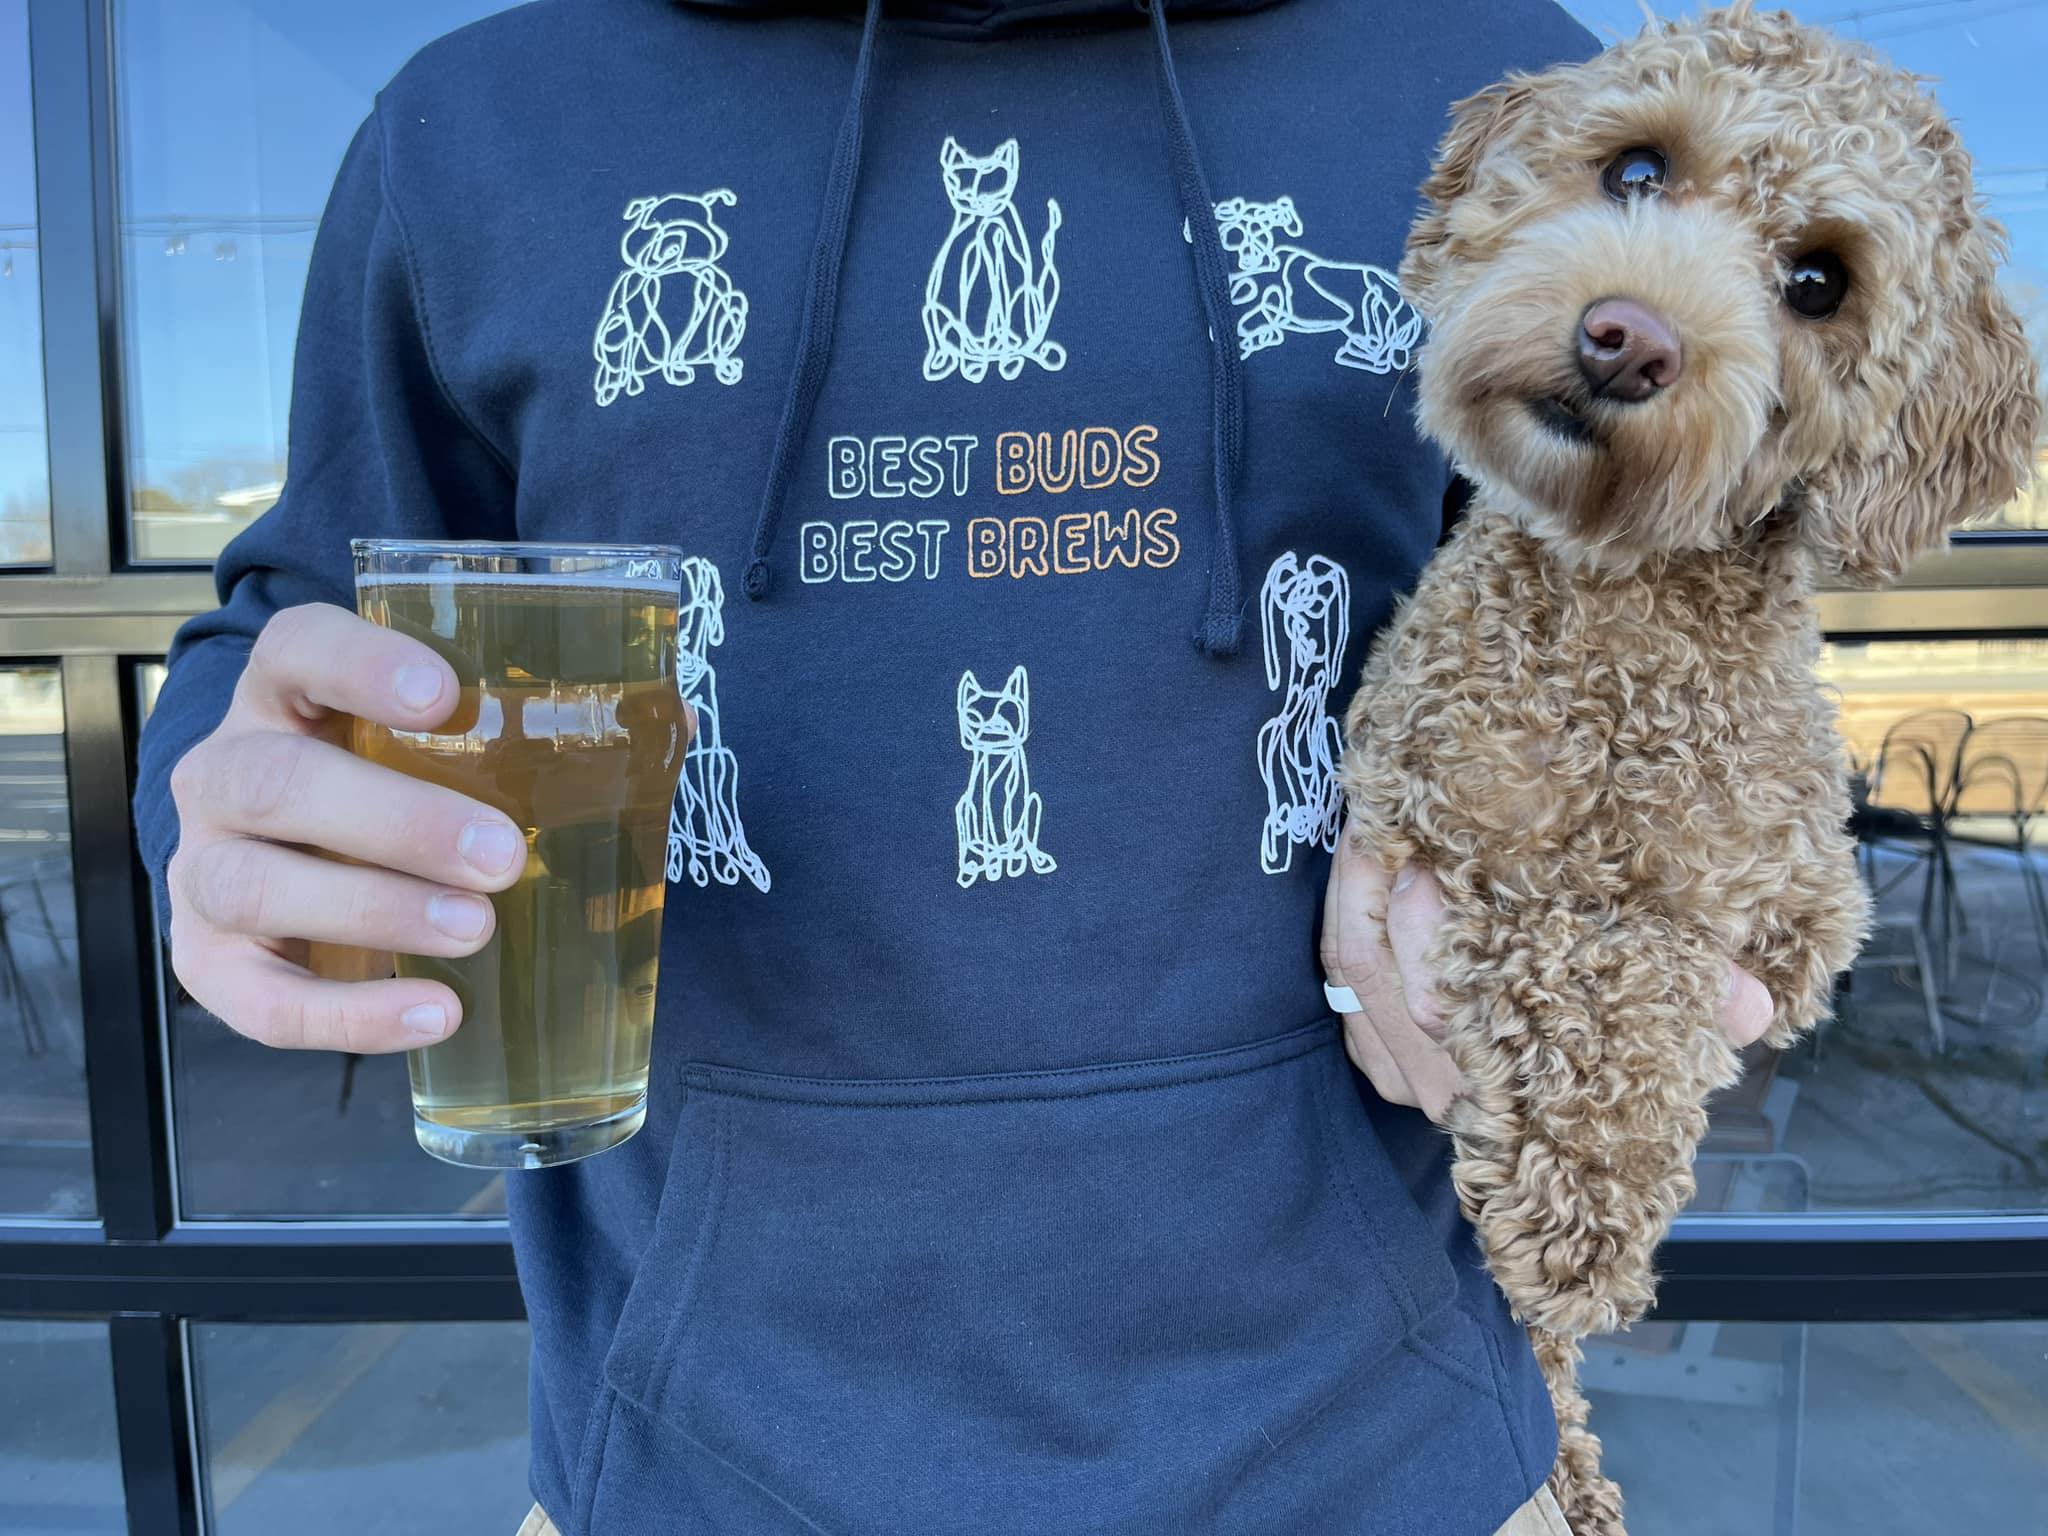 Pet Friendly Station 1 Brewing Company